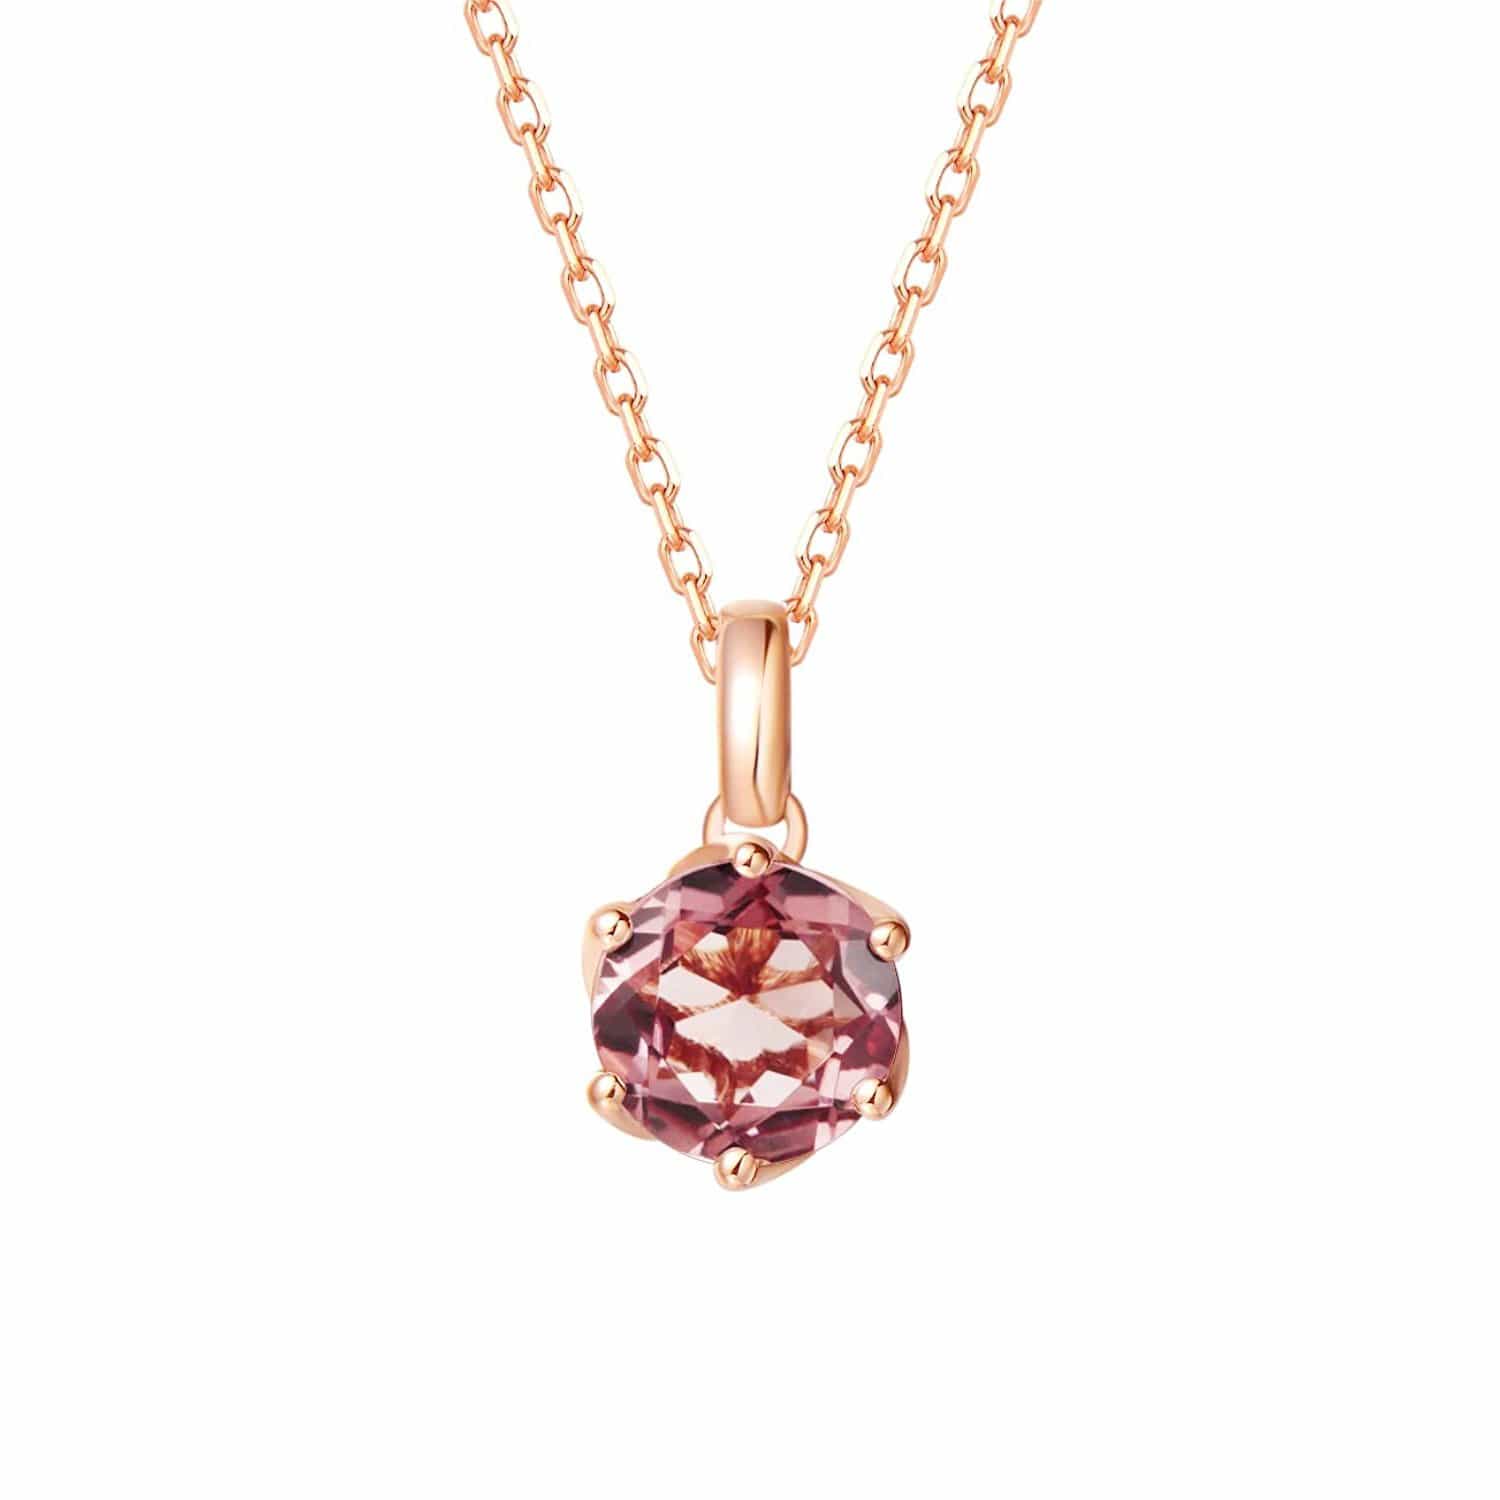 FANCIME Solitaire Dainty 14K Rose Gold Necklace Main